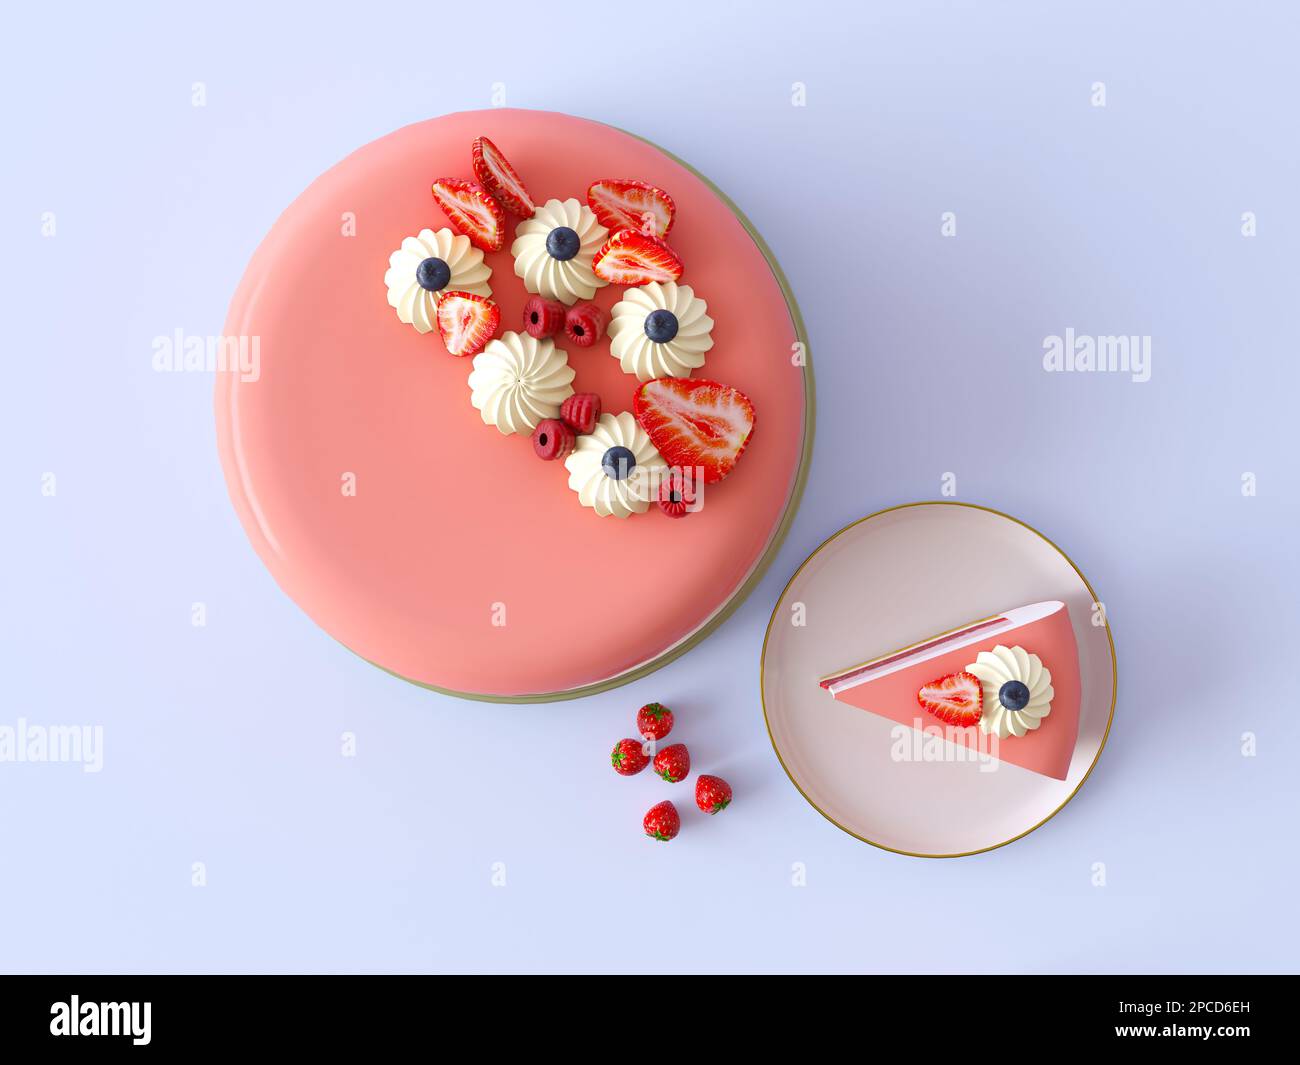 Mousse cake with mirror glaze pink, ripe strawberries and berries. Slice of cake on a plate, little vase with strawberries isolated on pastel blue Stock Photo